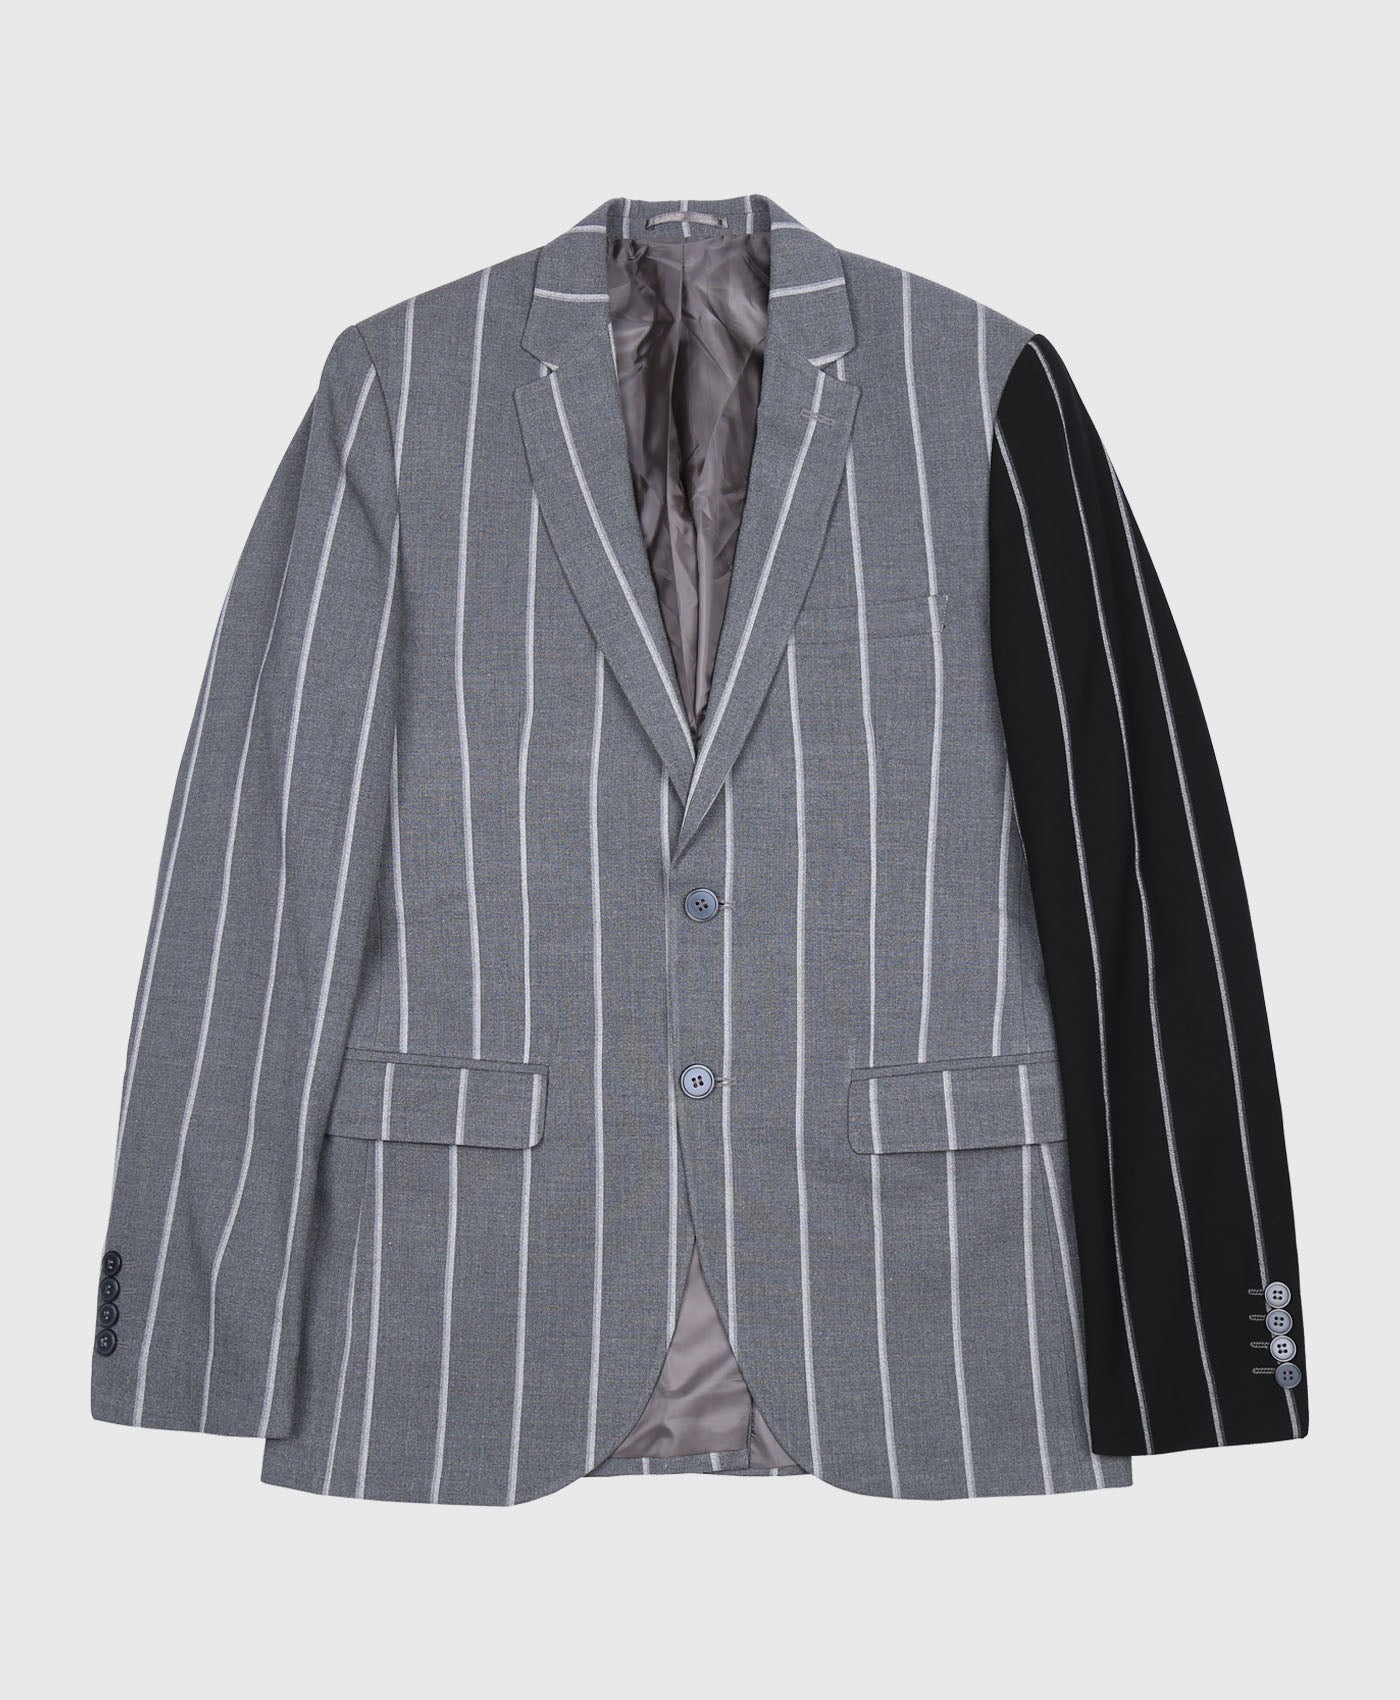 Suit Jacket In Stripe With Contrast Panels